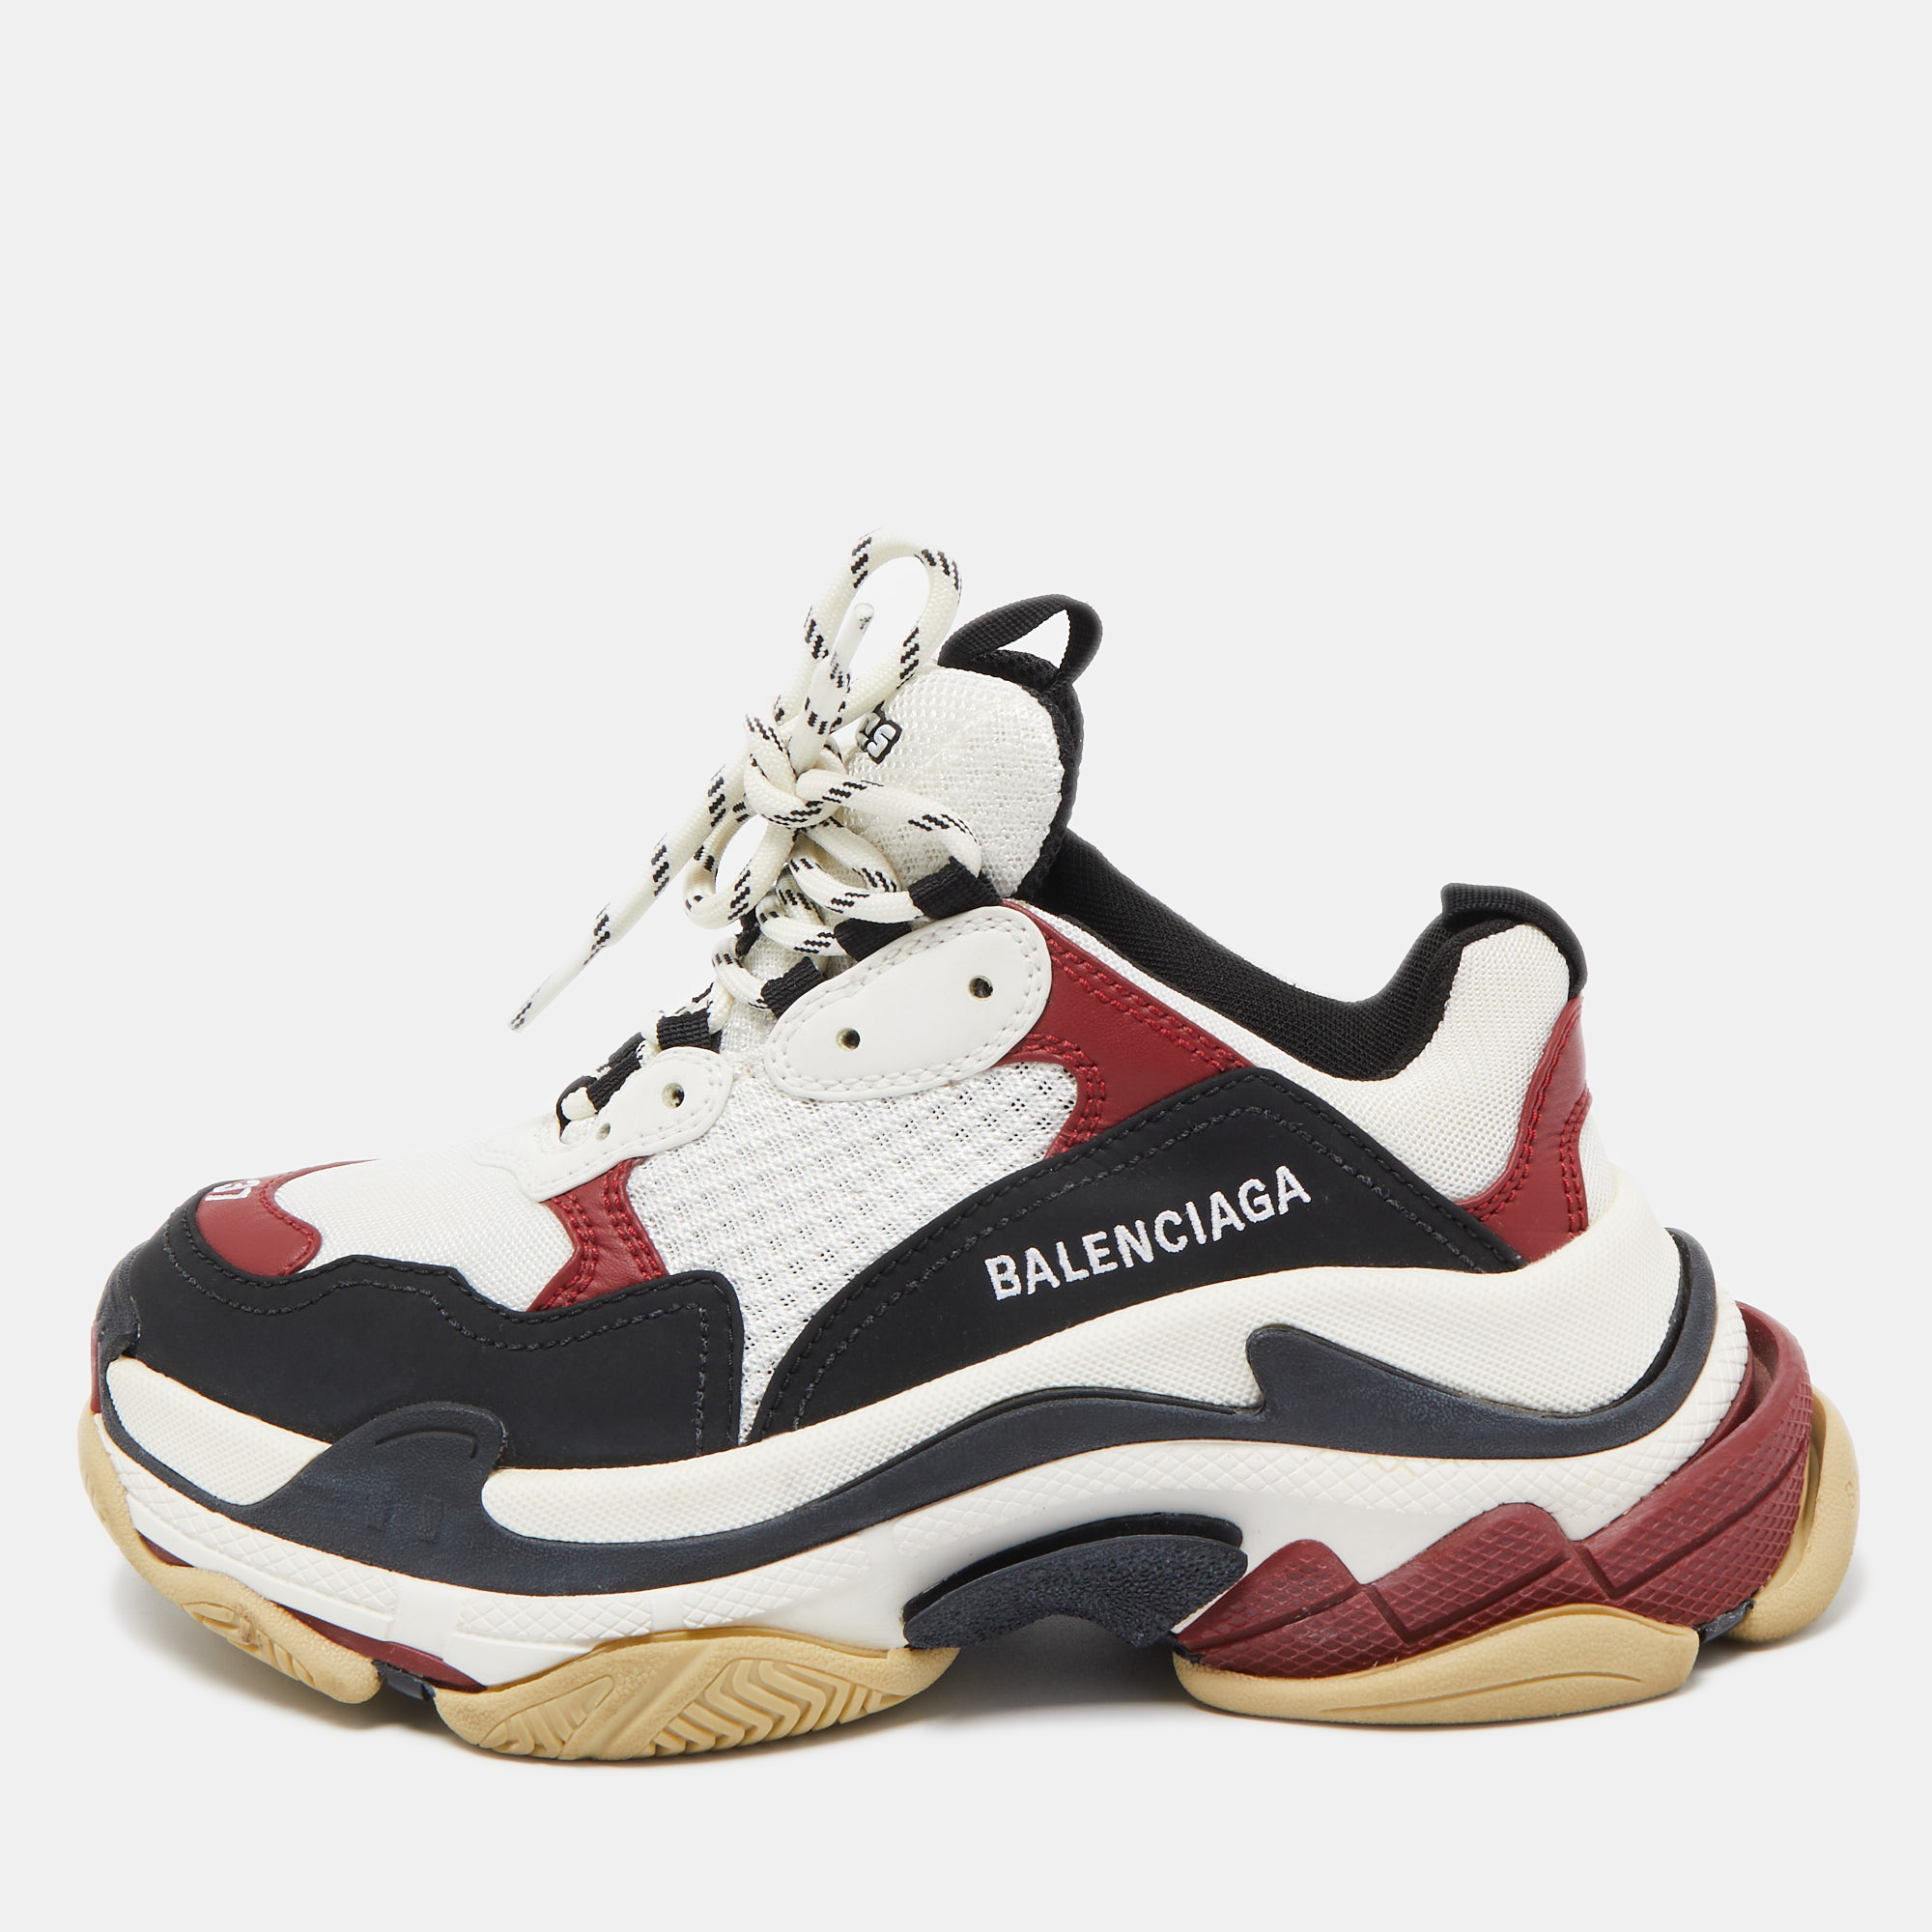 Balenciaga Tricolor Nubuck Leather And Mesh Triple S Low Top Sneakers Size 37